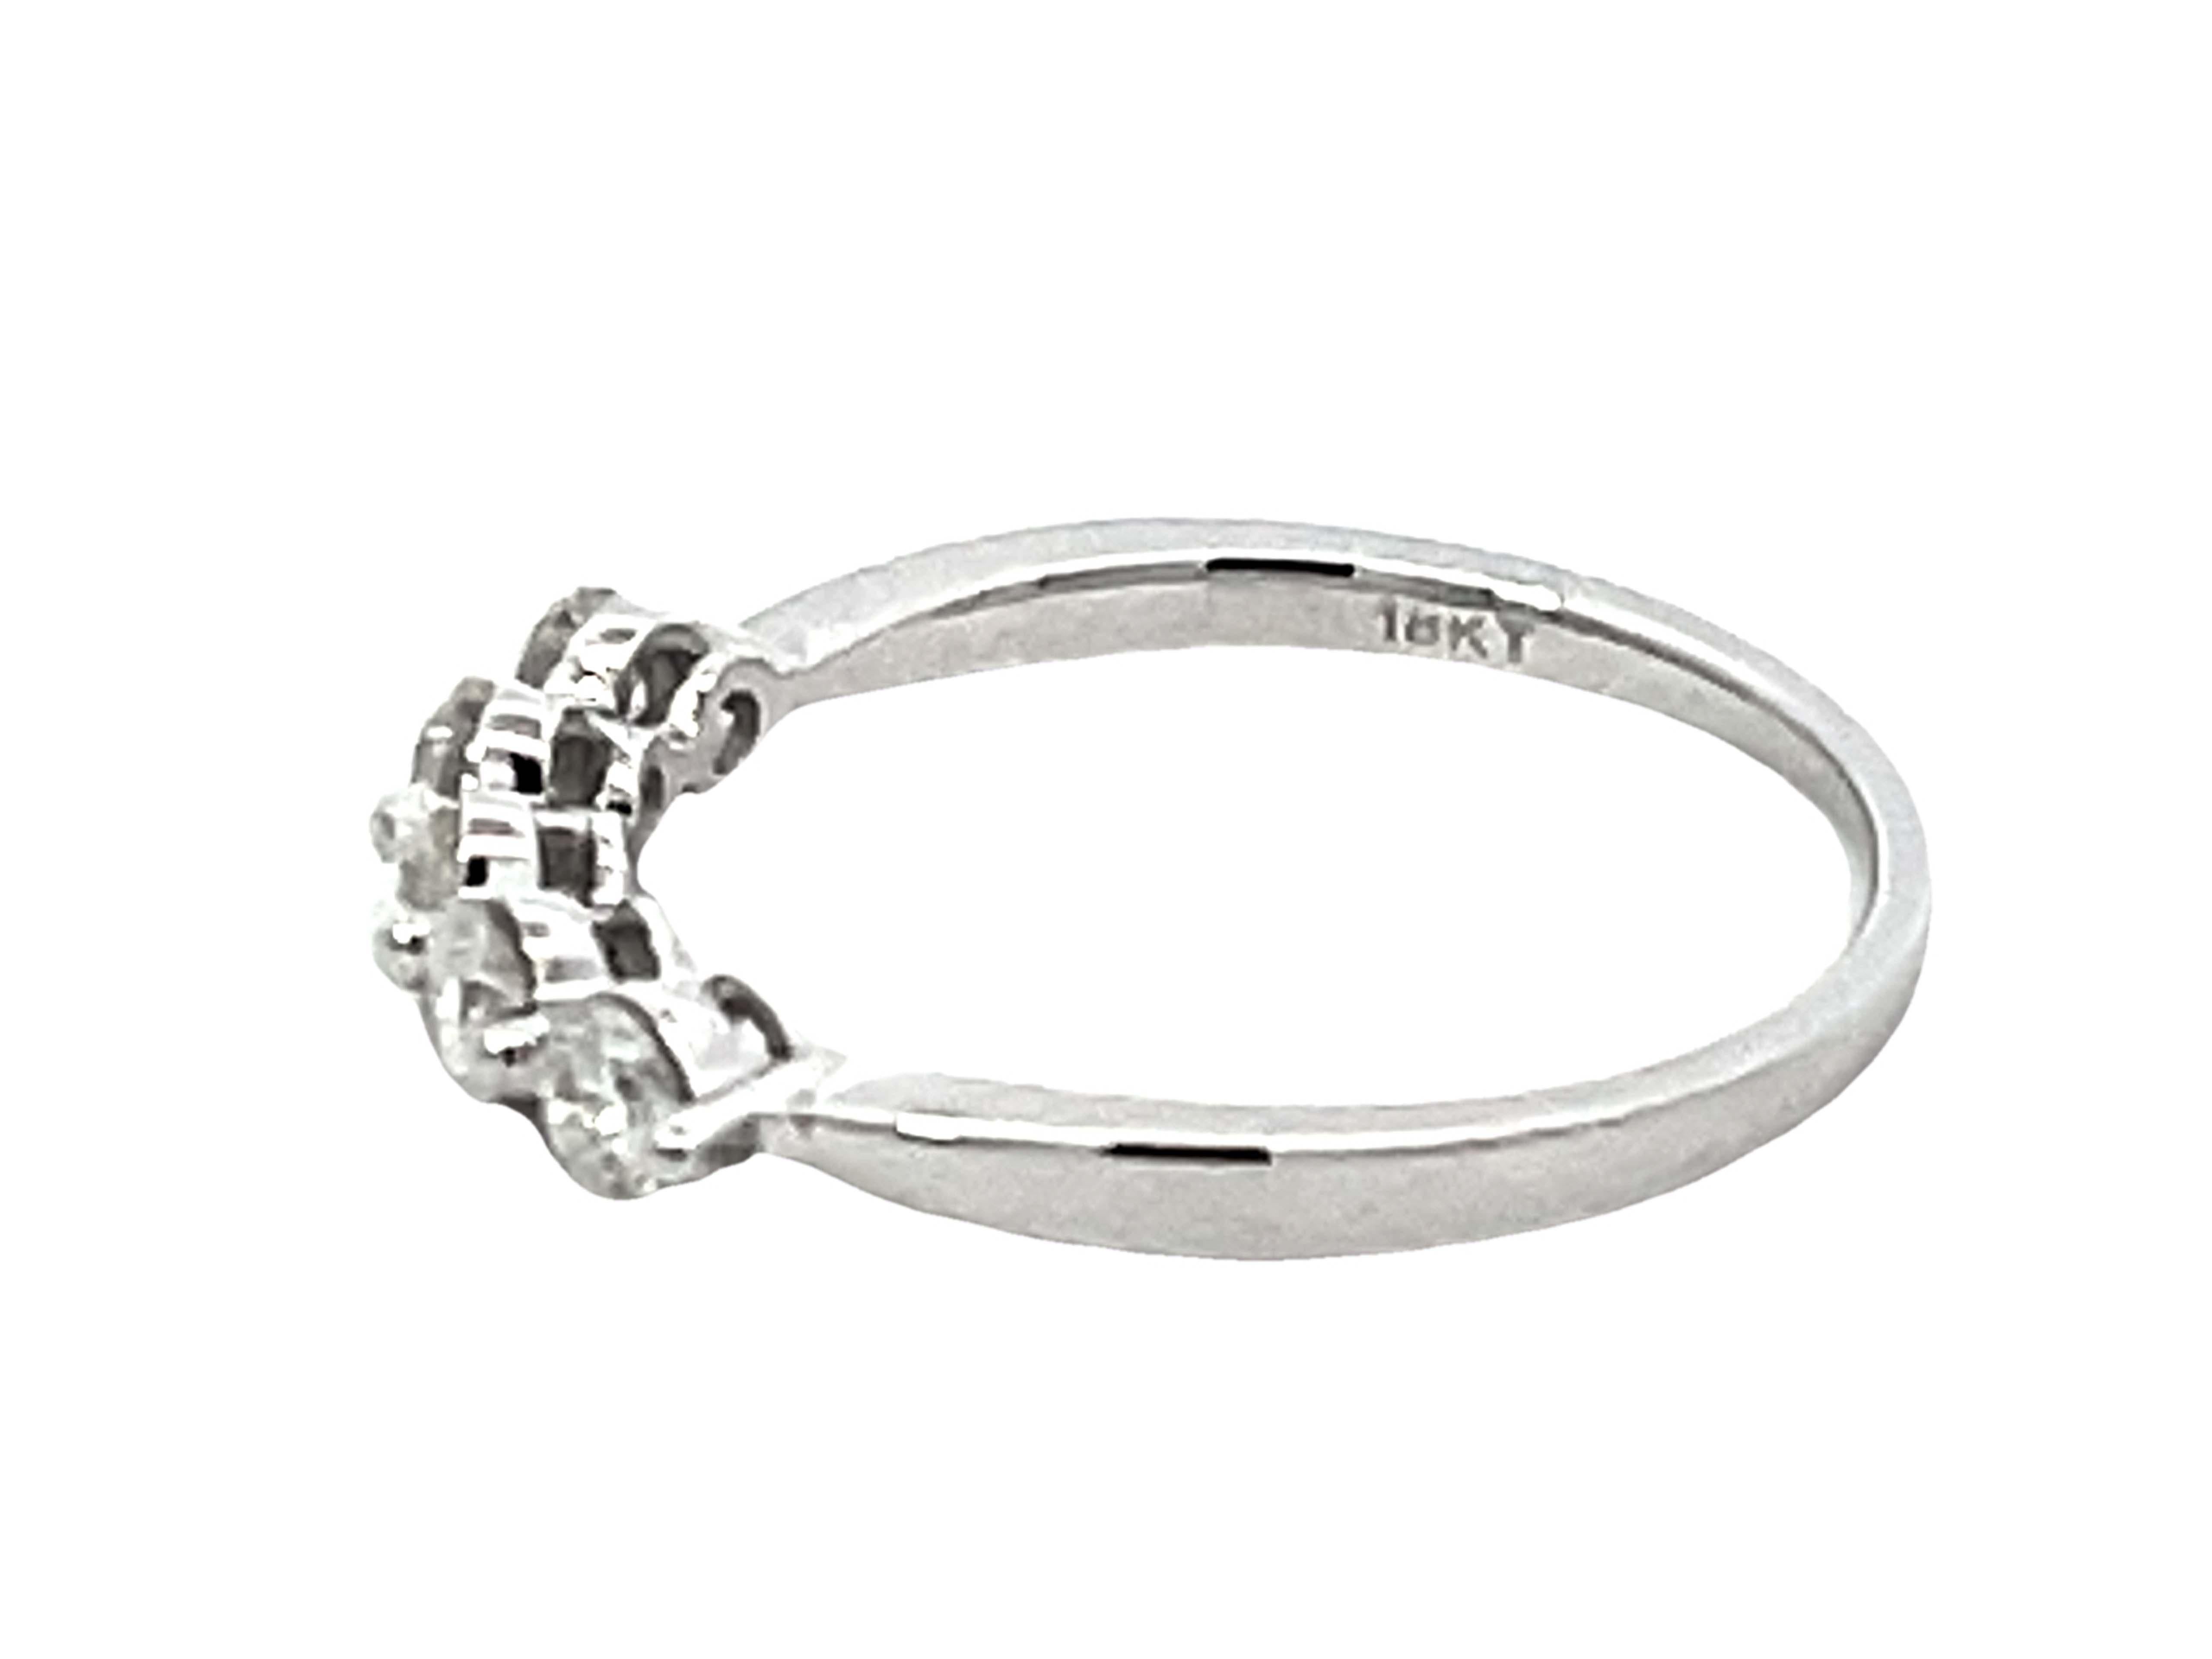 5 Brilliant Cut 0.50 Carat Diamond Band Ring Solid 18k White Gold For Sale 1